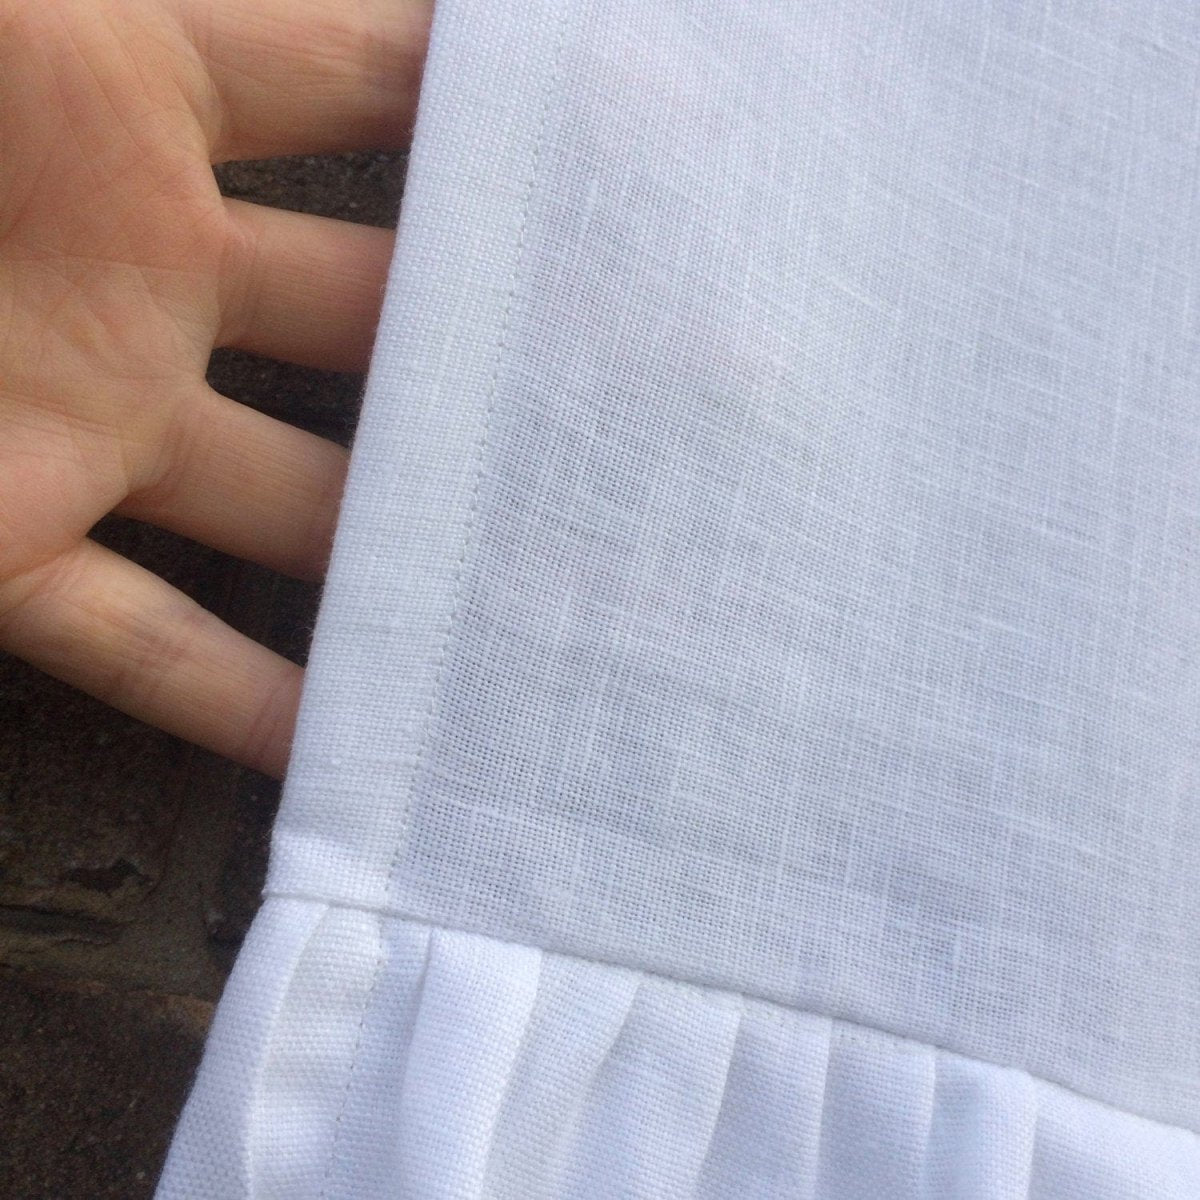 Risely White Linen Tie up Ruffle Curtain - Linen and Letters